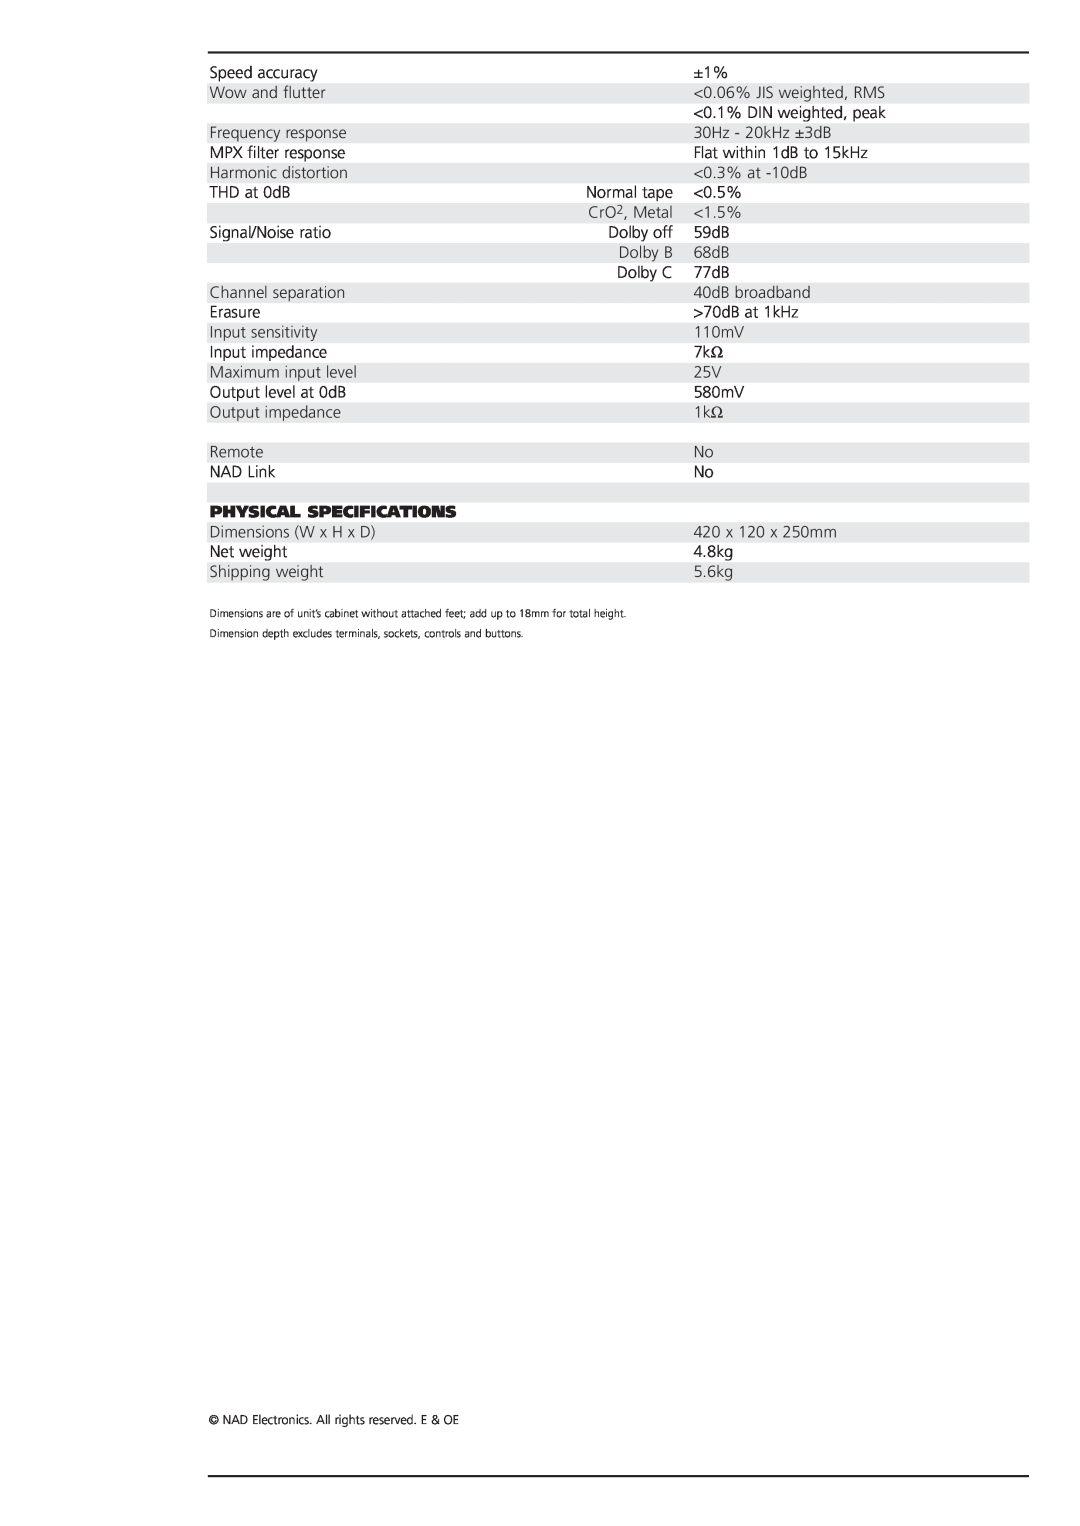 NAD 6155 brochure Physical Specifications 